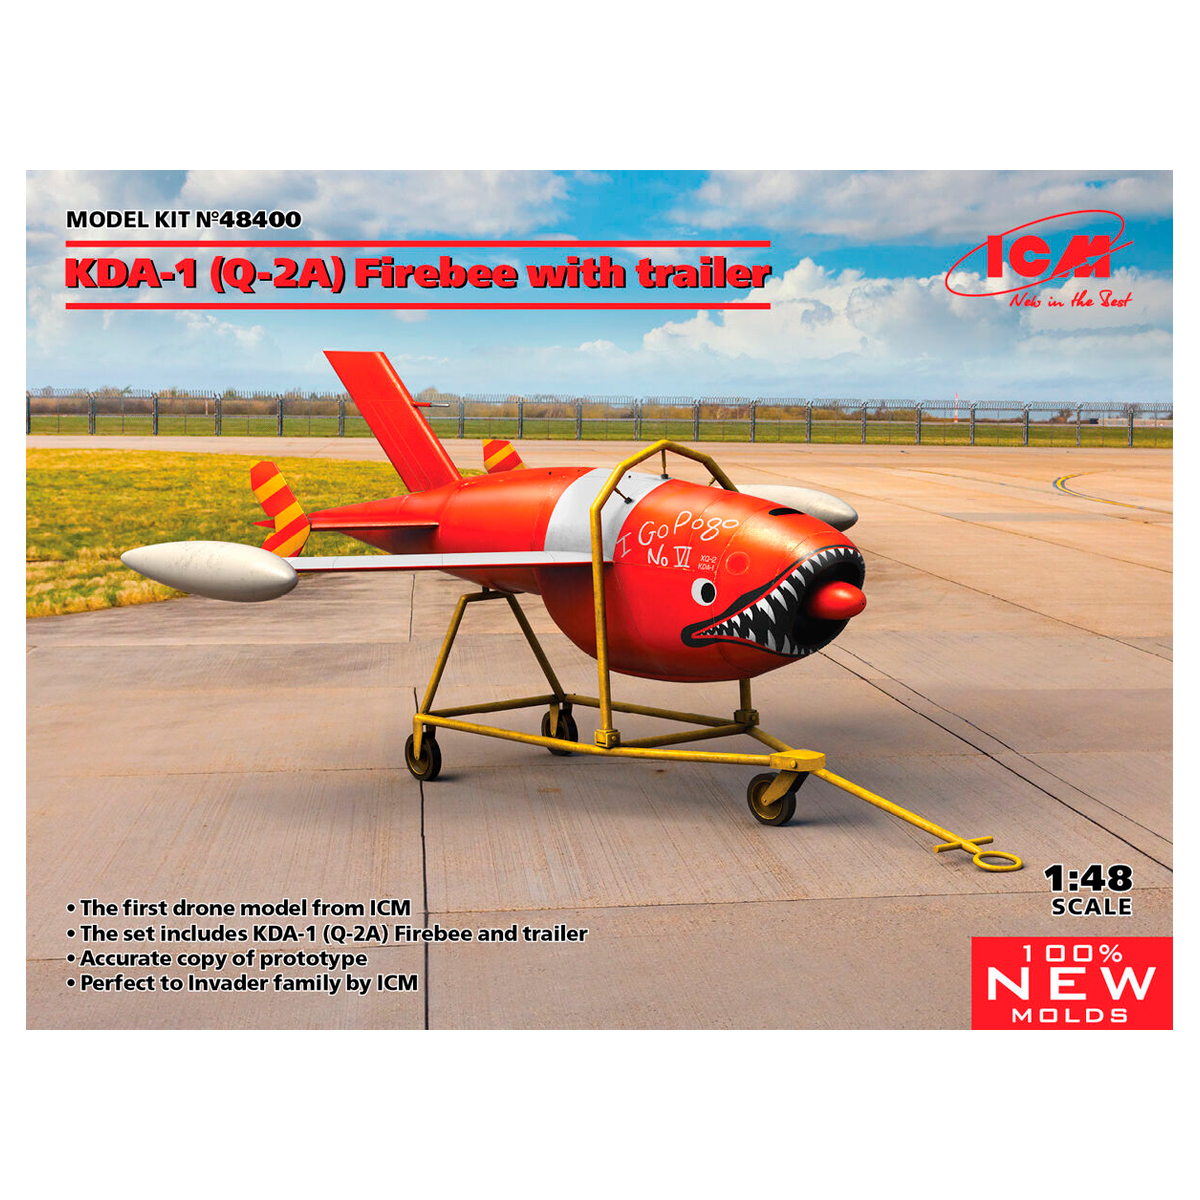 Q-2A (KDA-1) Firebee with trailer (1 airplane and trailer) 1/48